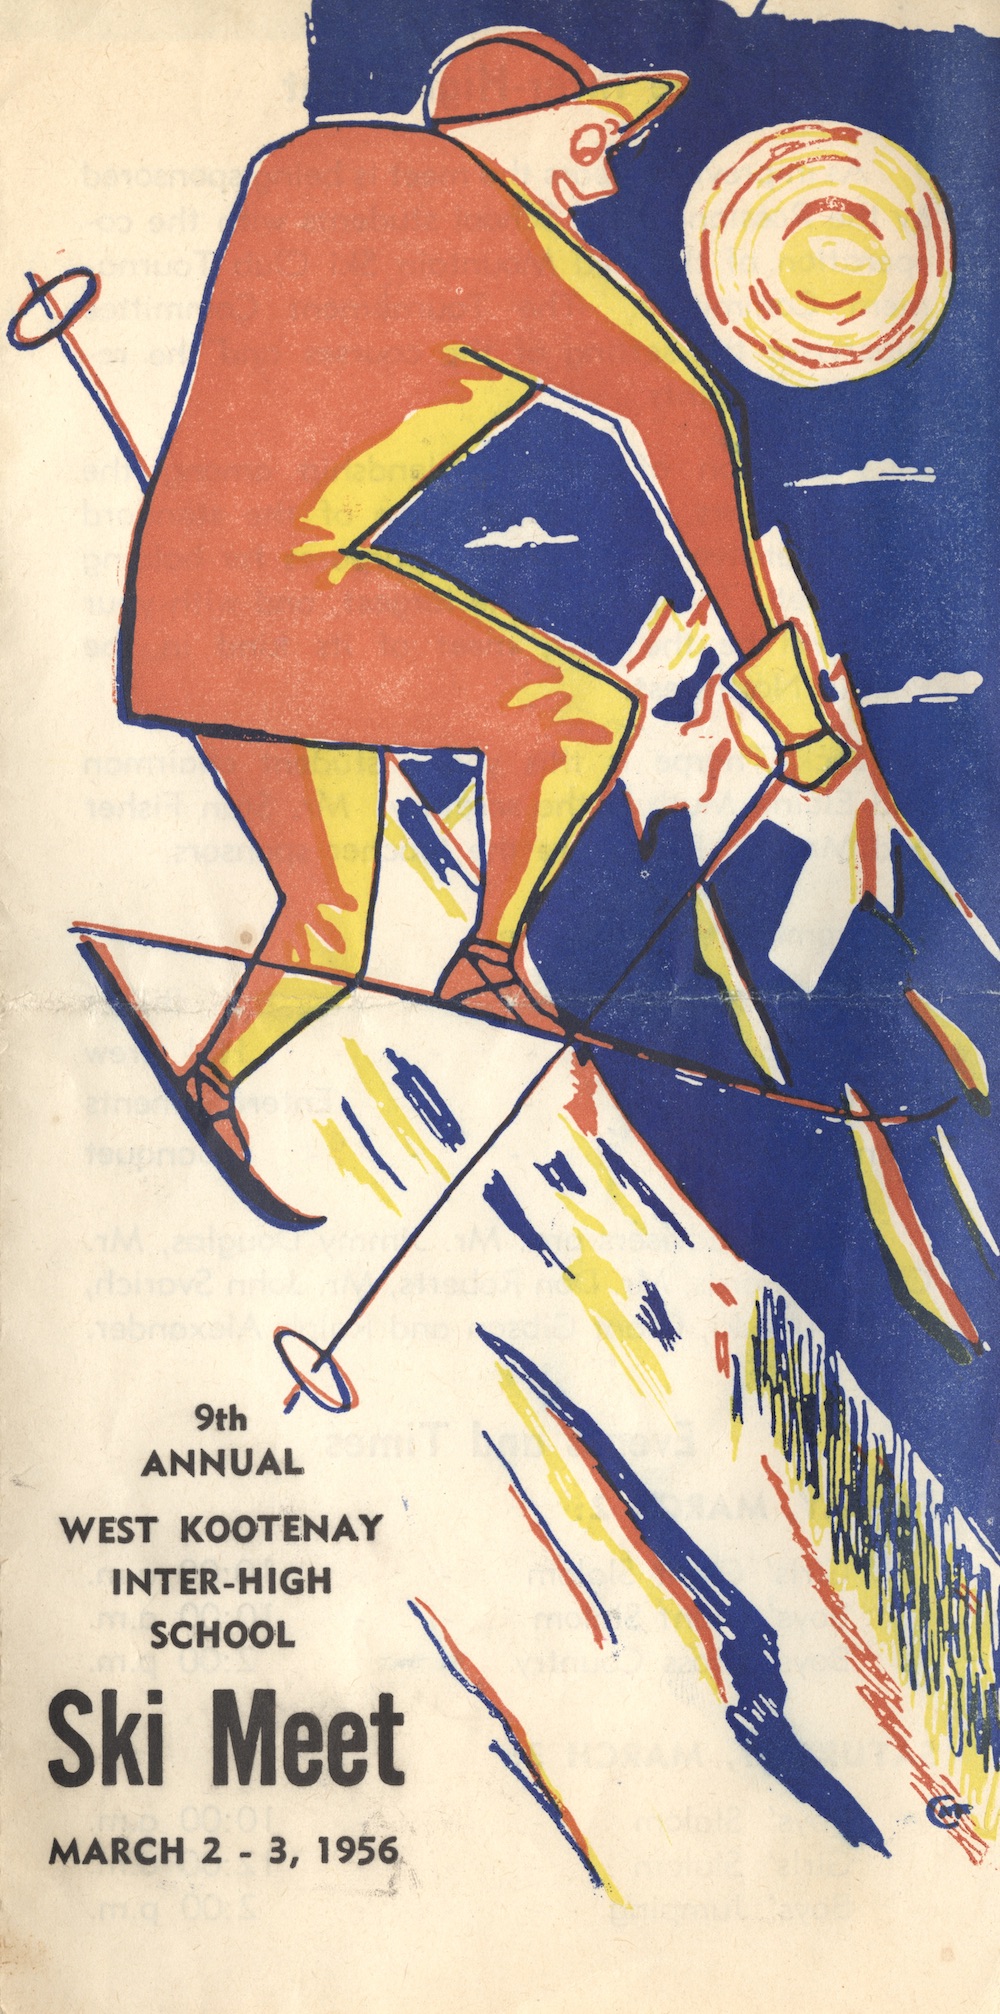 Colourful, illustrated cover of ski meet programme from 1956.